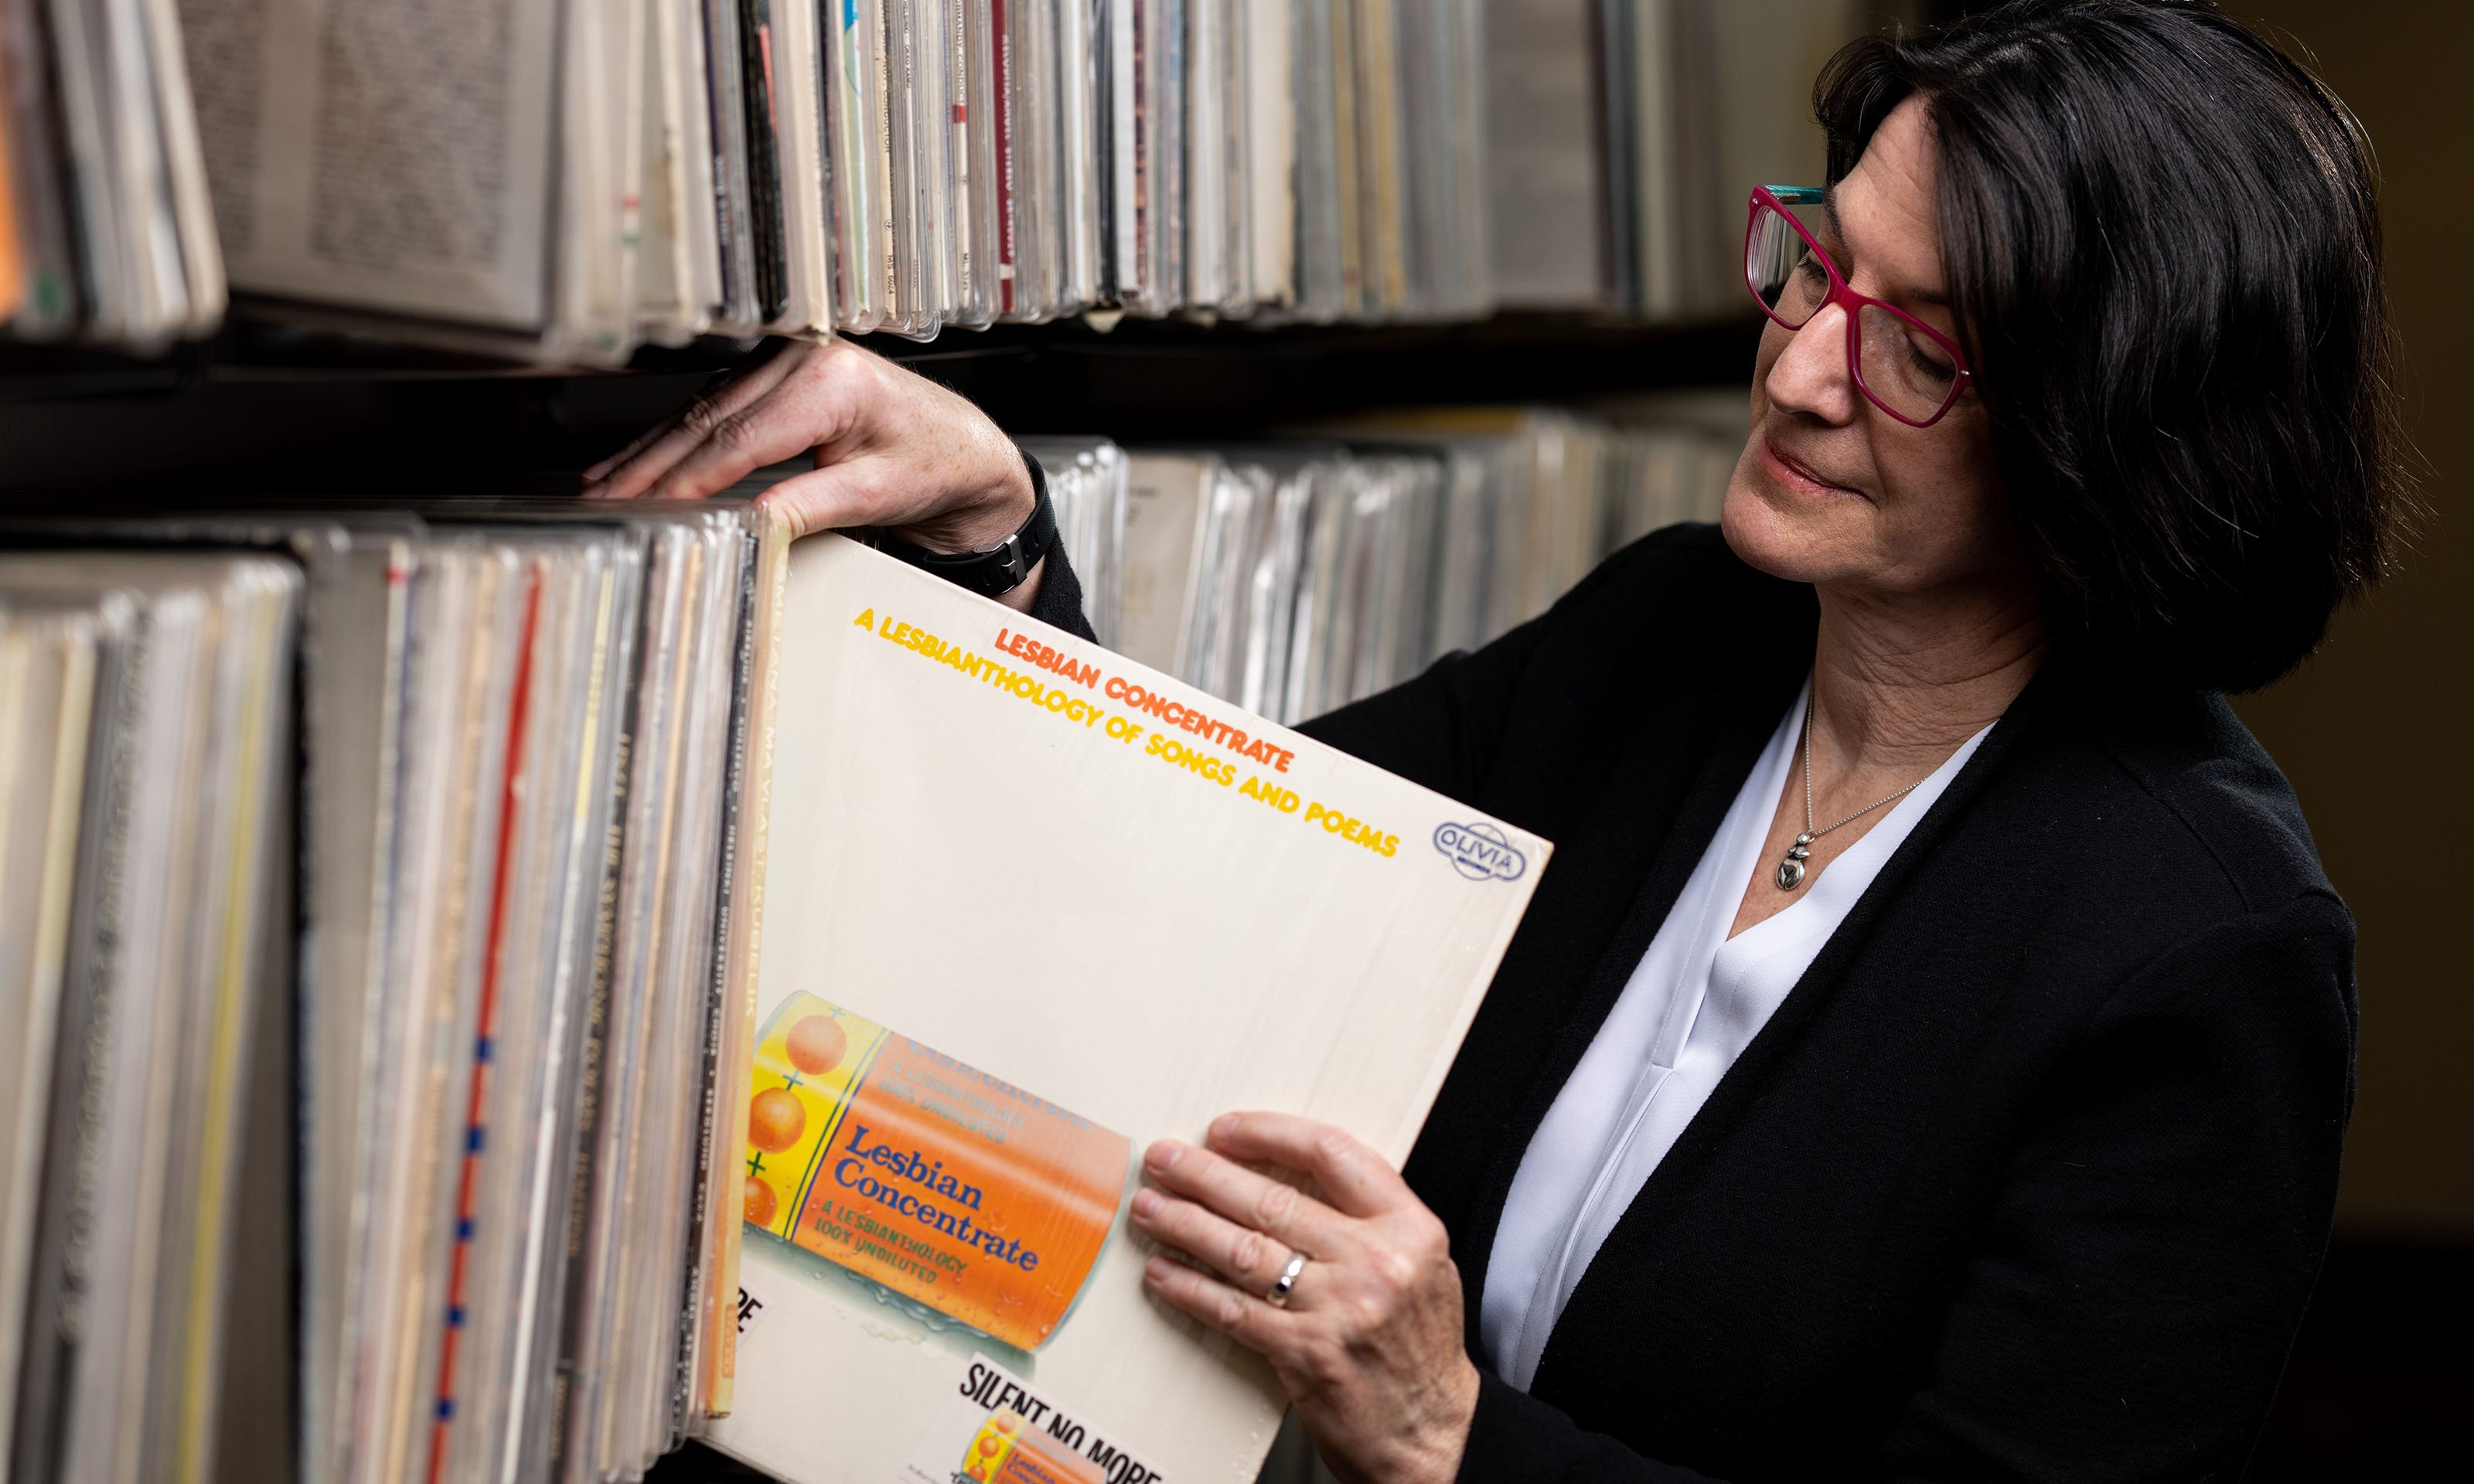 Woman pulling record album out of shelf of albums - record labelled "Lesbian Concentrate"